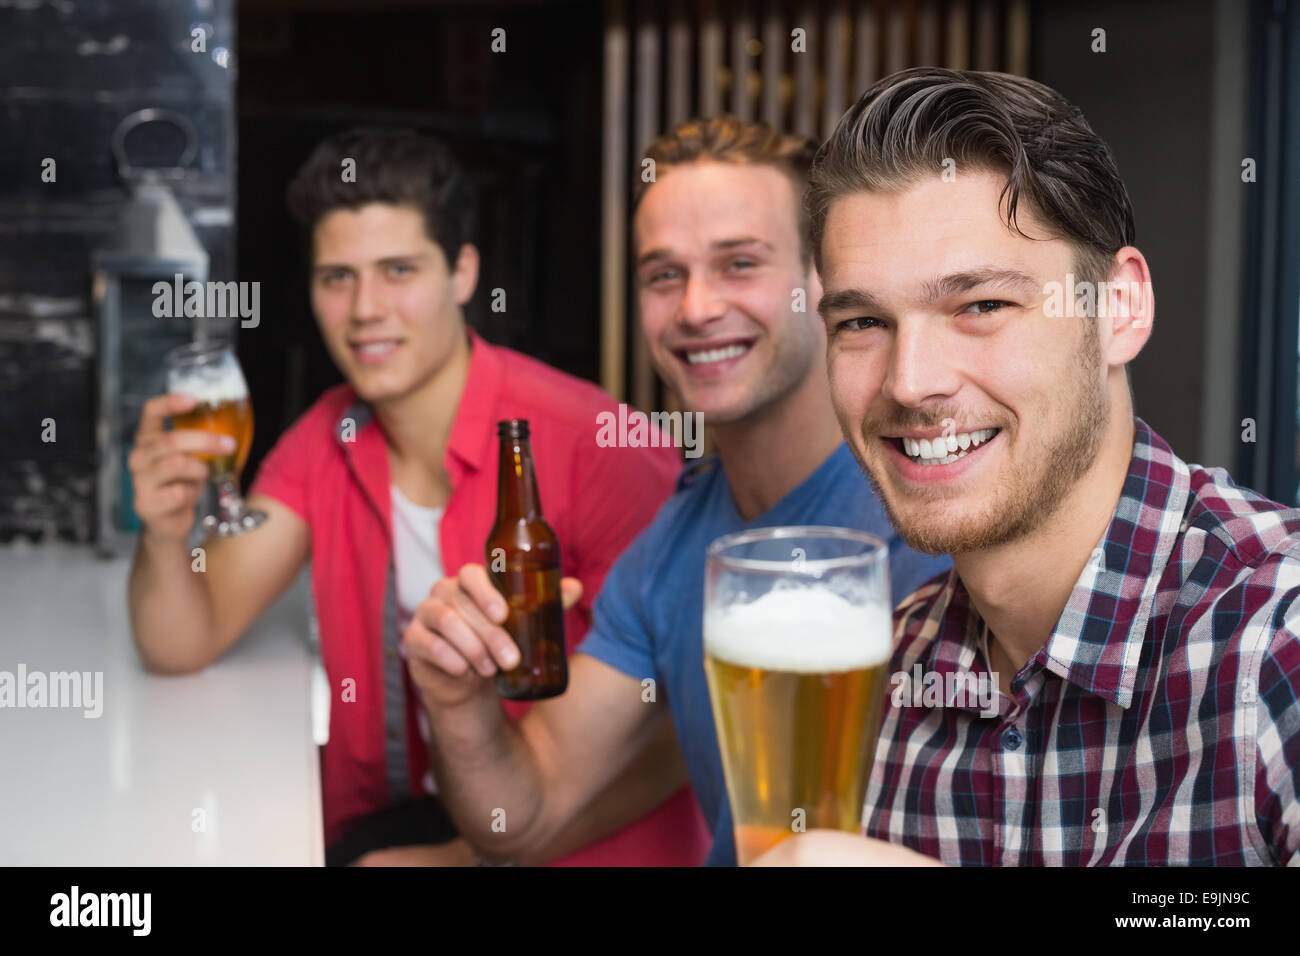 Young men drinking beer together Stock Photo